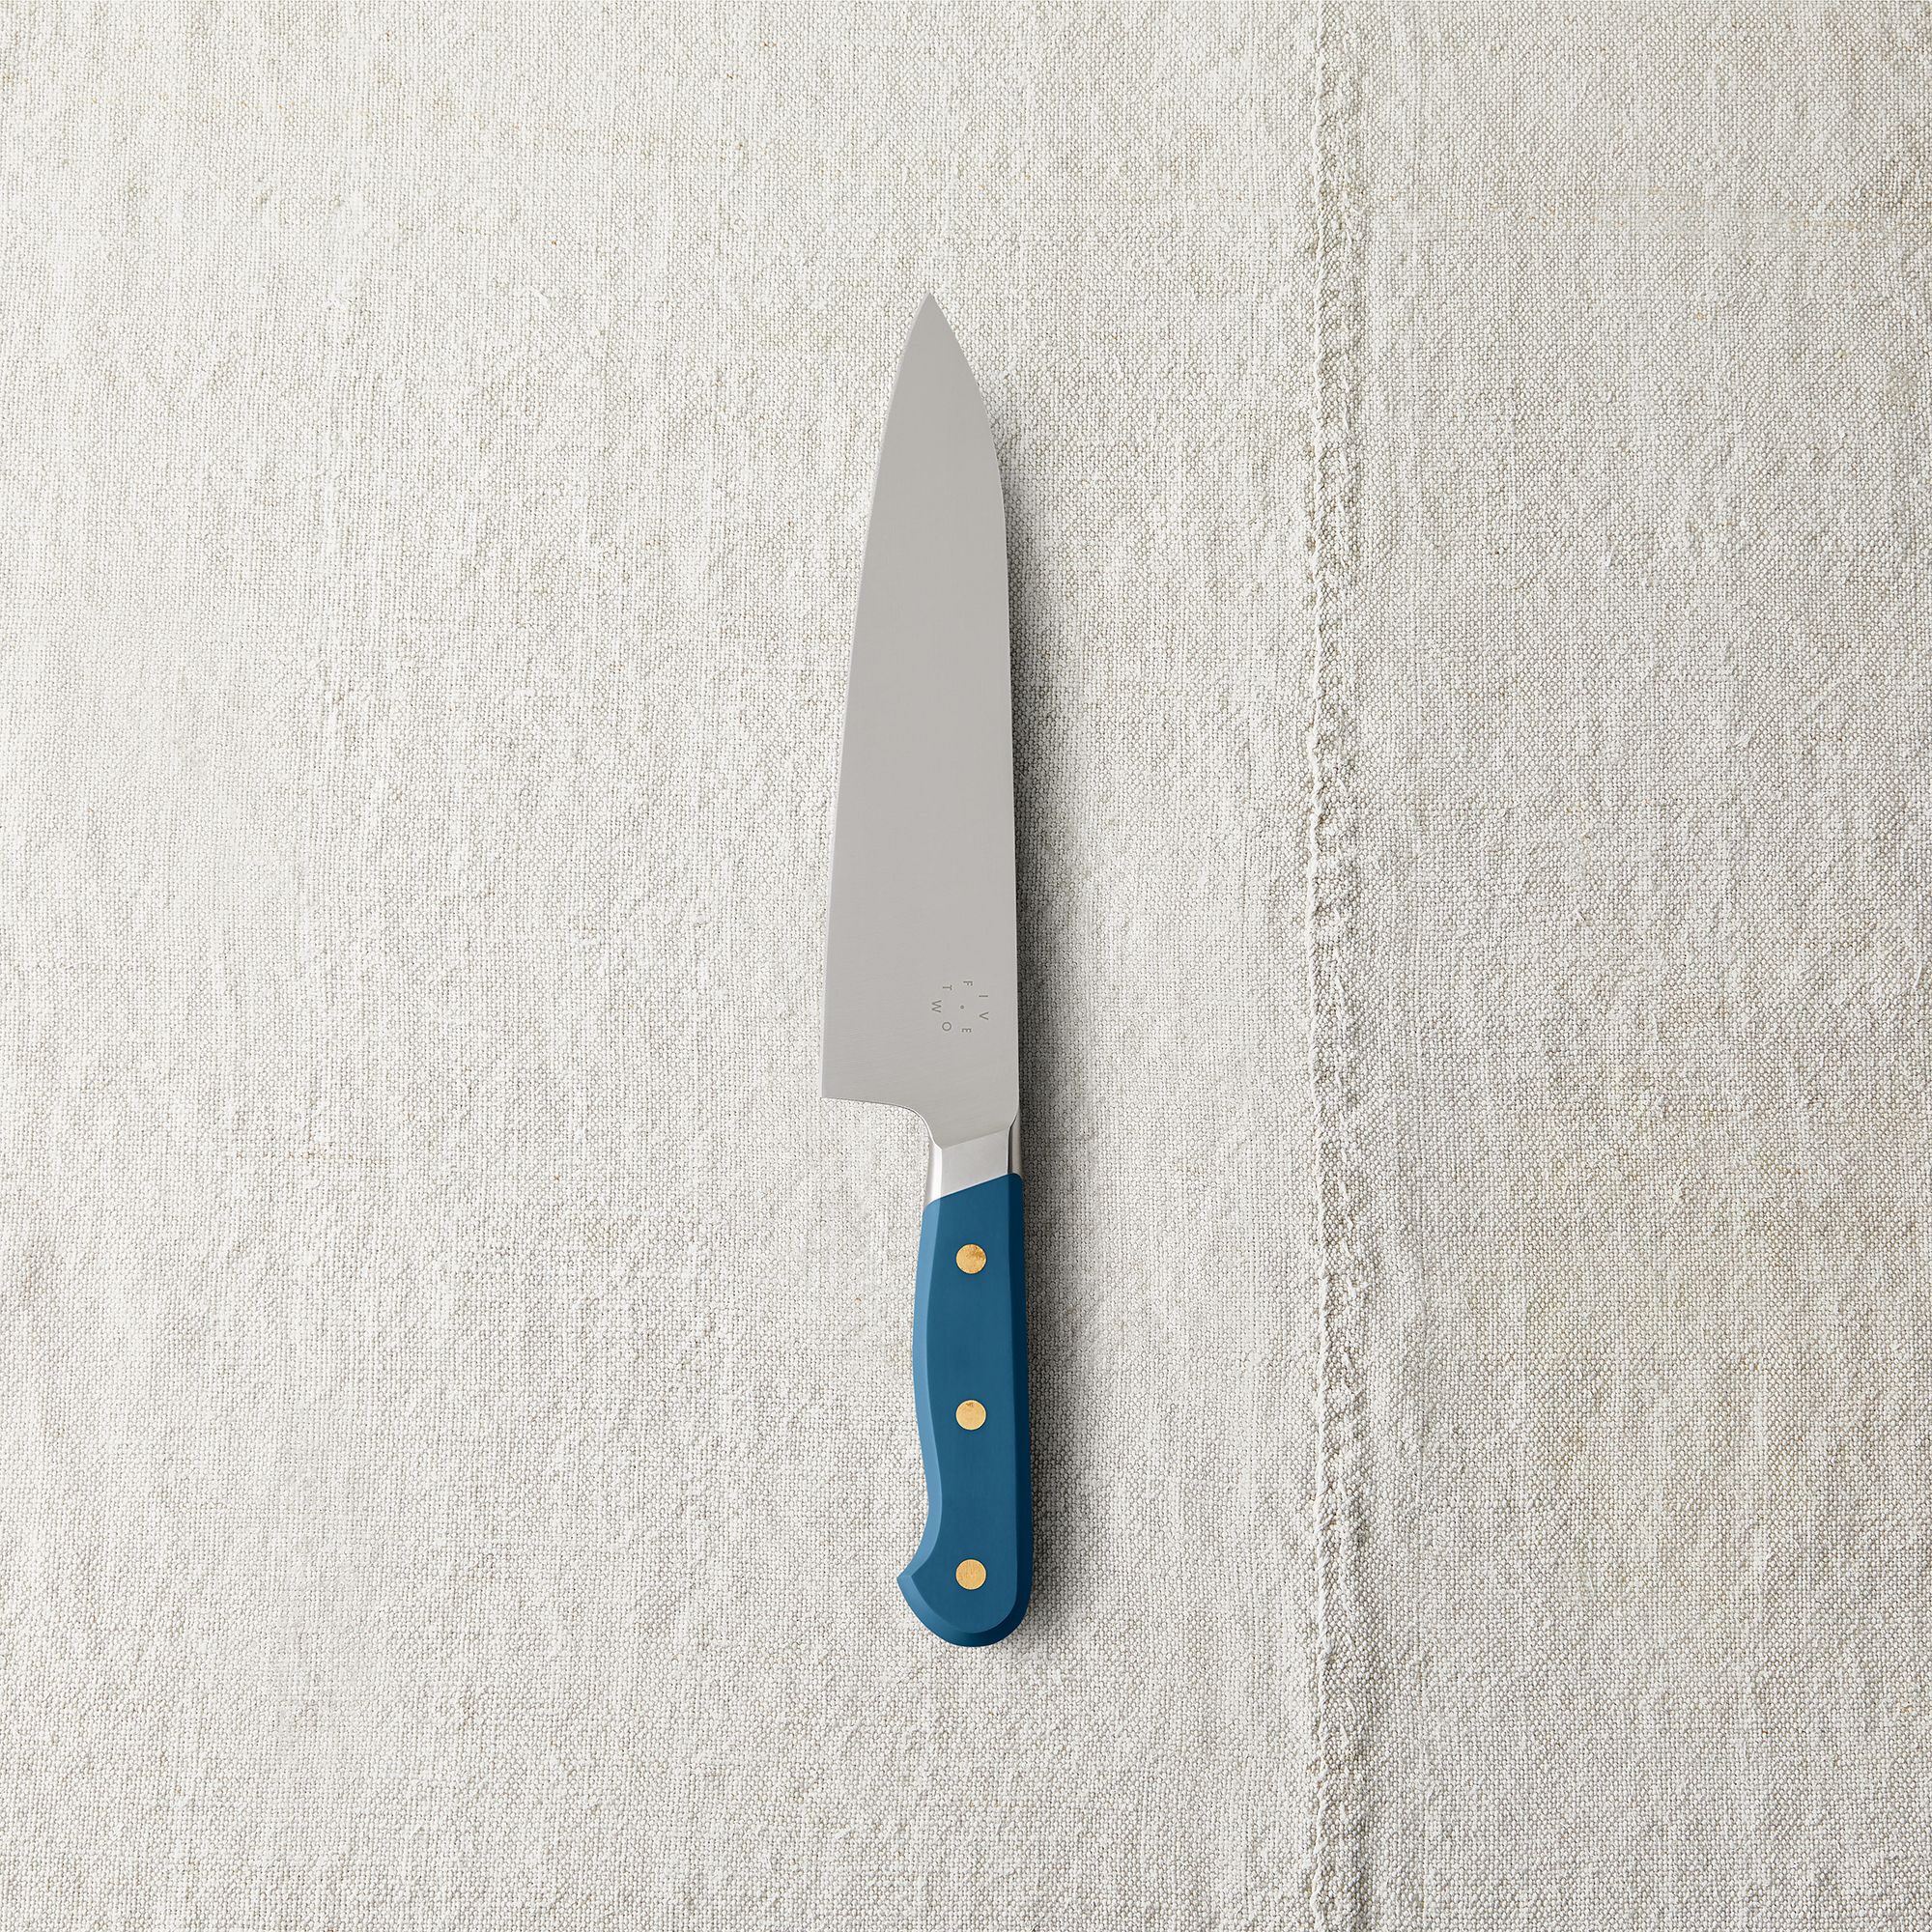 Knife with blue handle